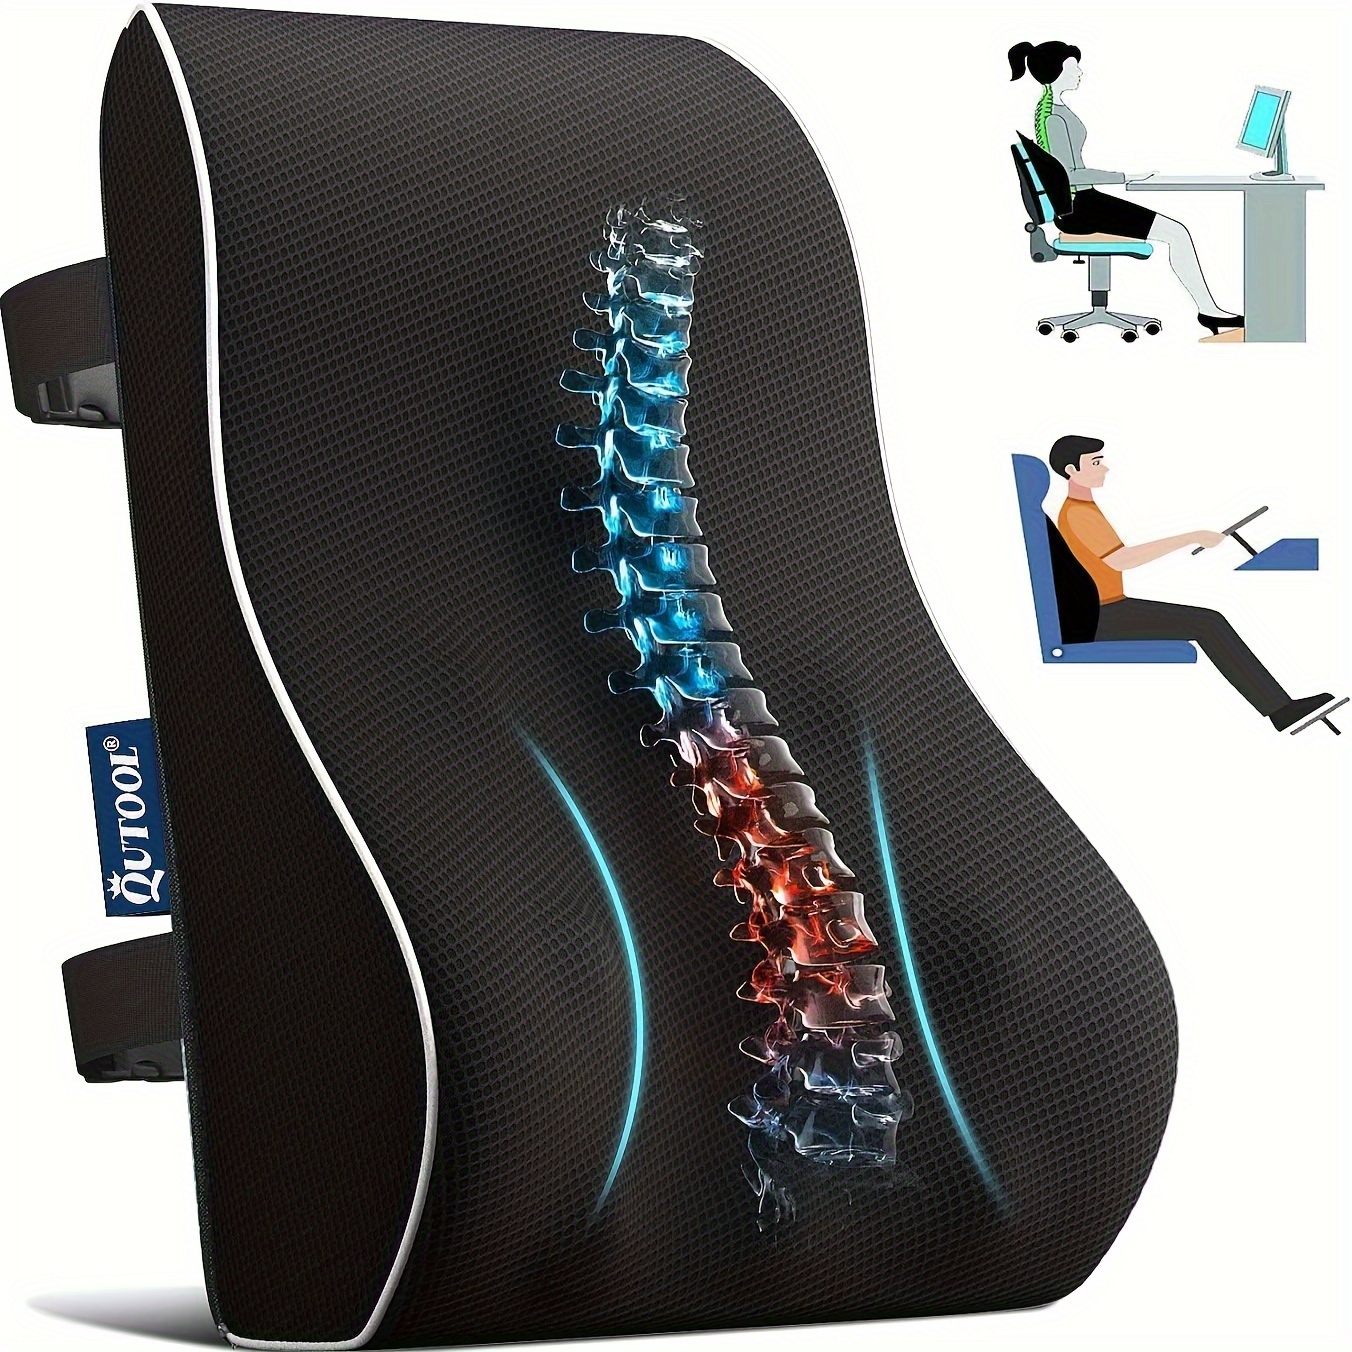 Chair back support - Alleviate Back Discomfort and Improve Posture